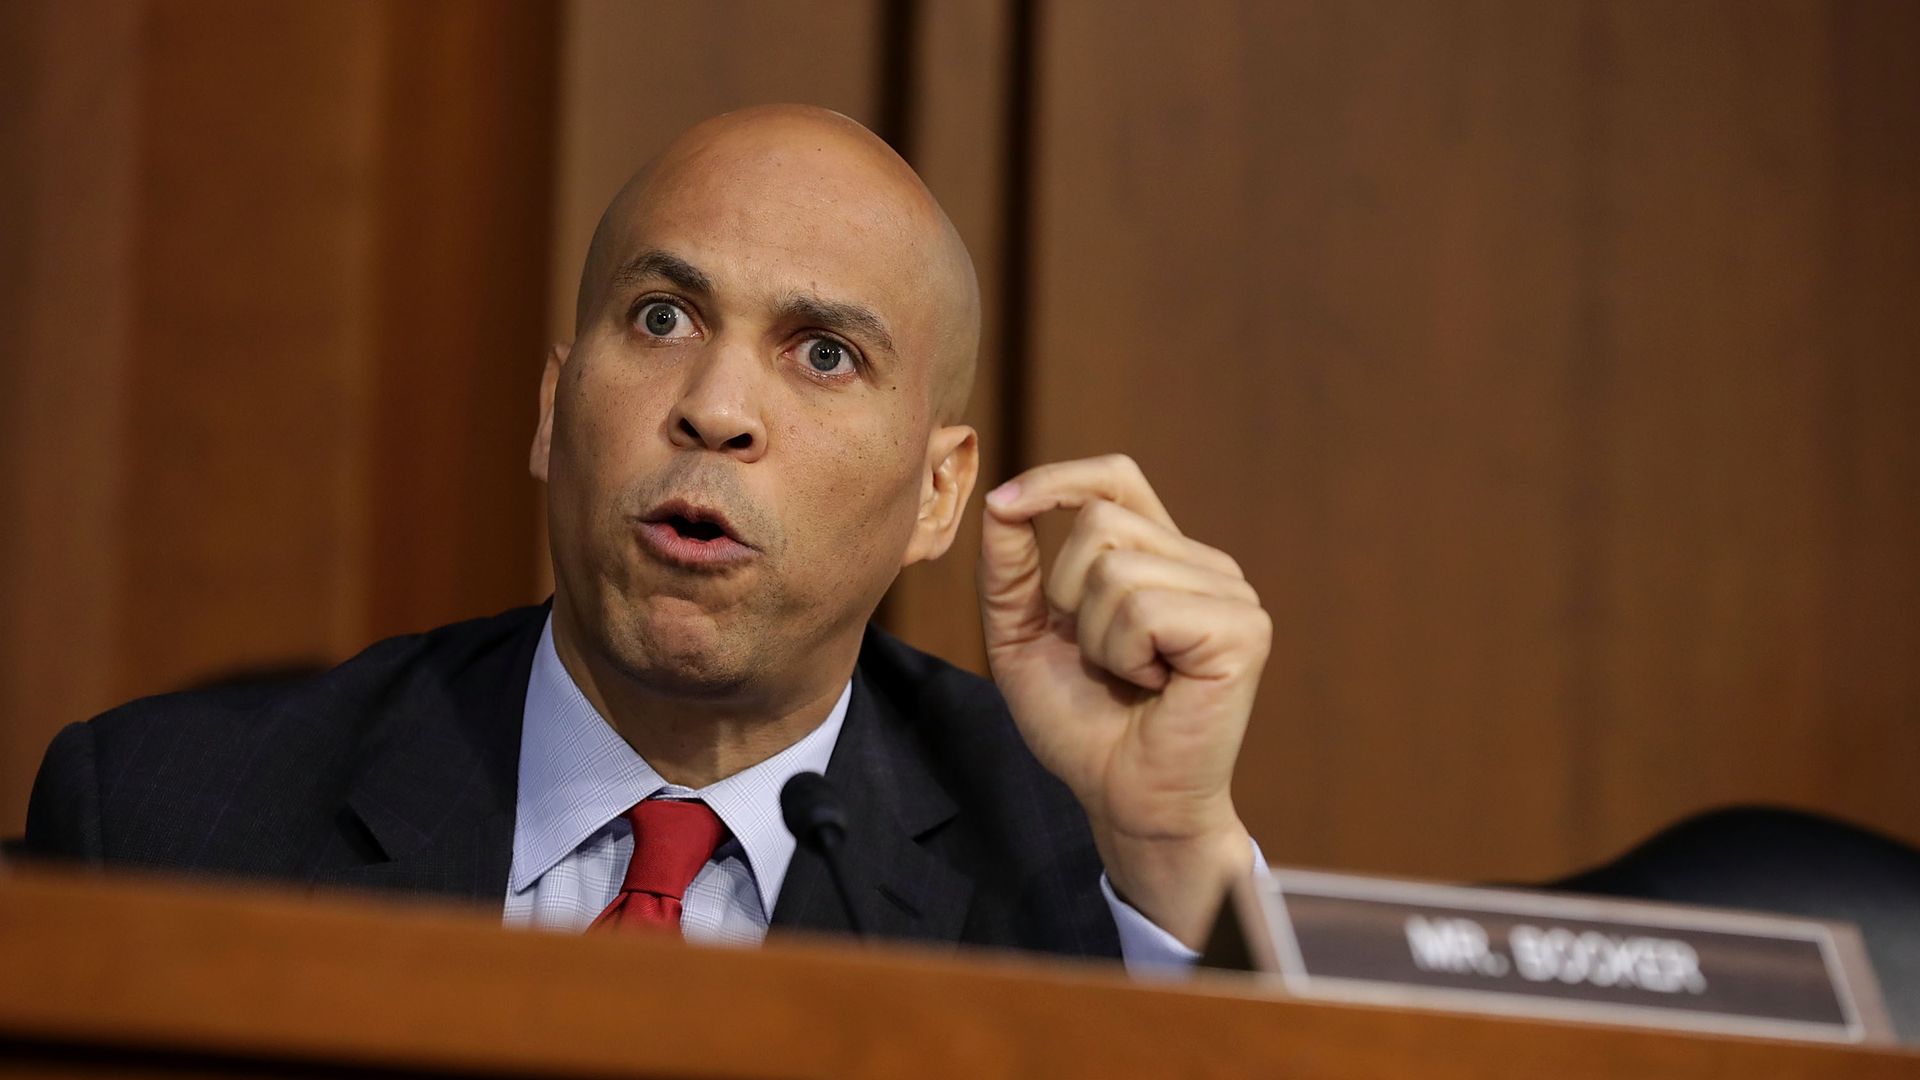 Sen. Cory Booker speaking angrily in a hearing